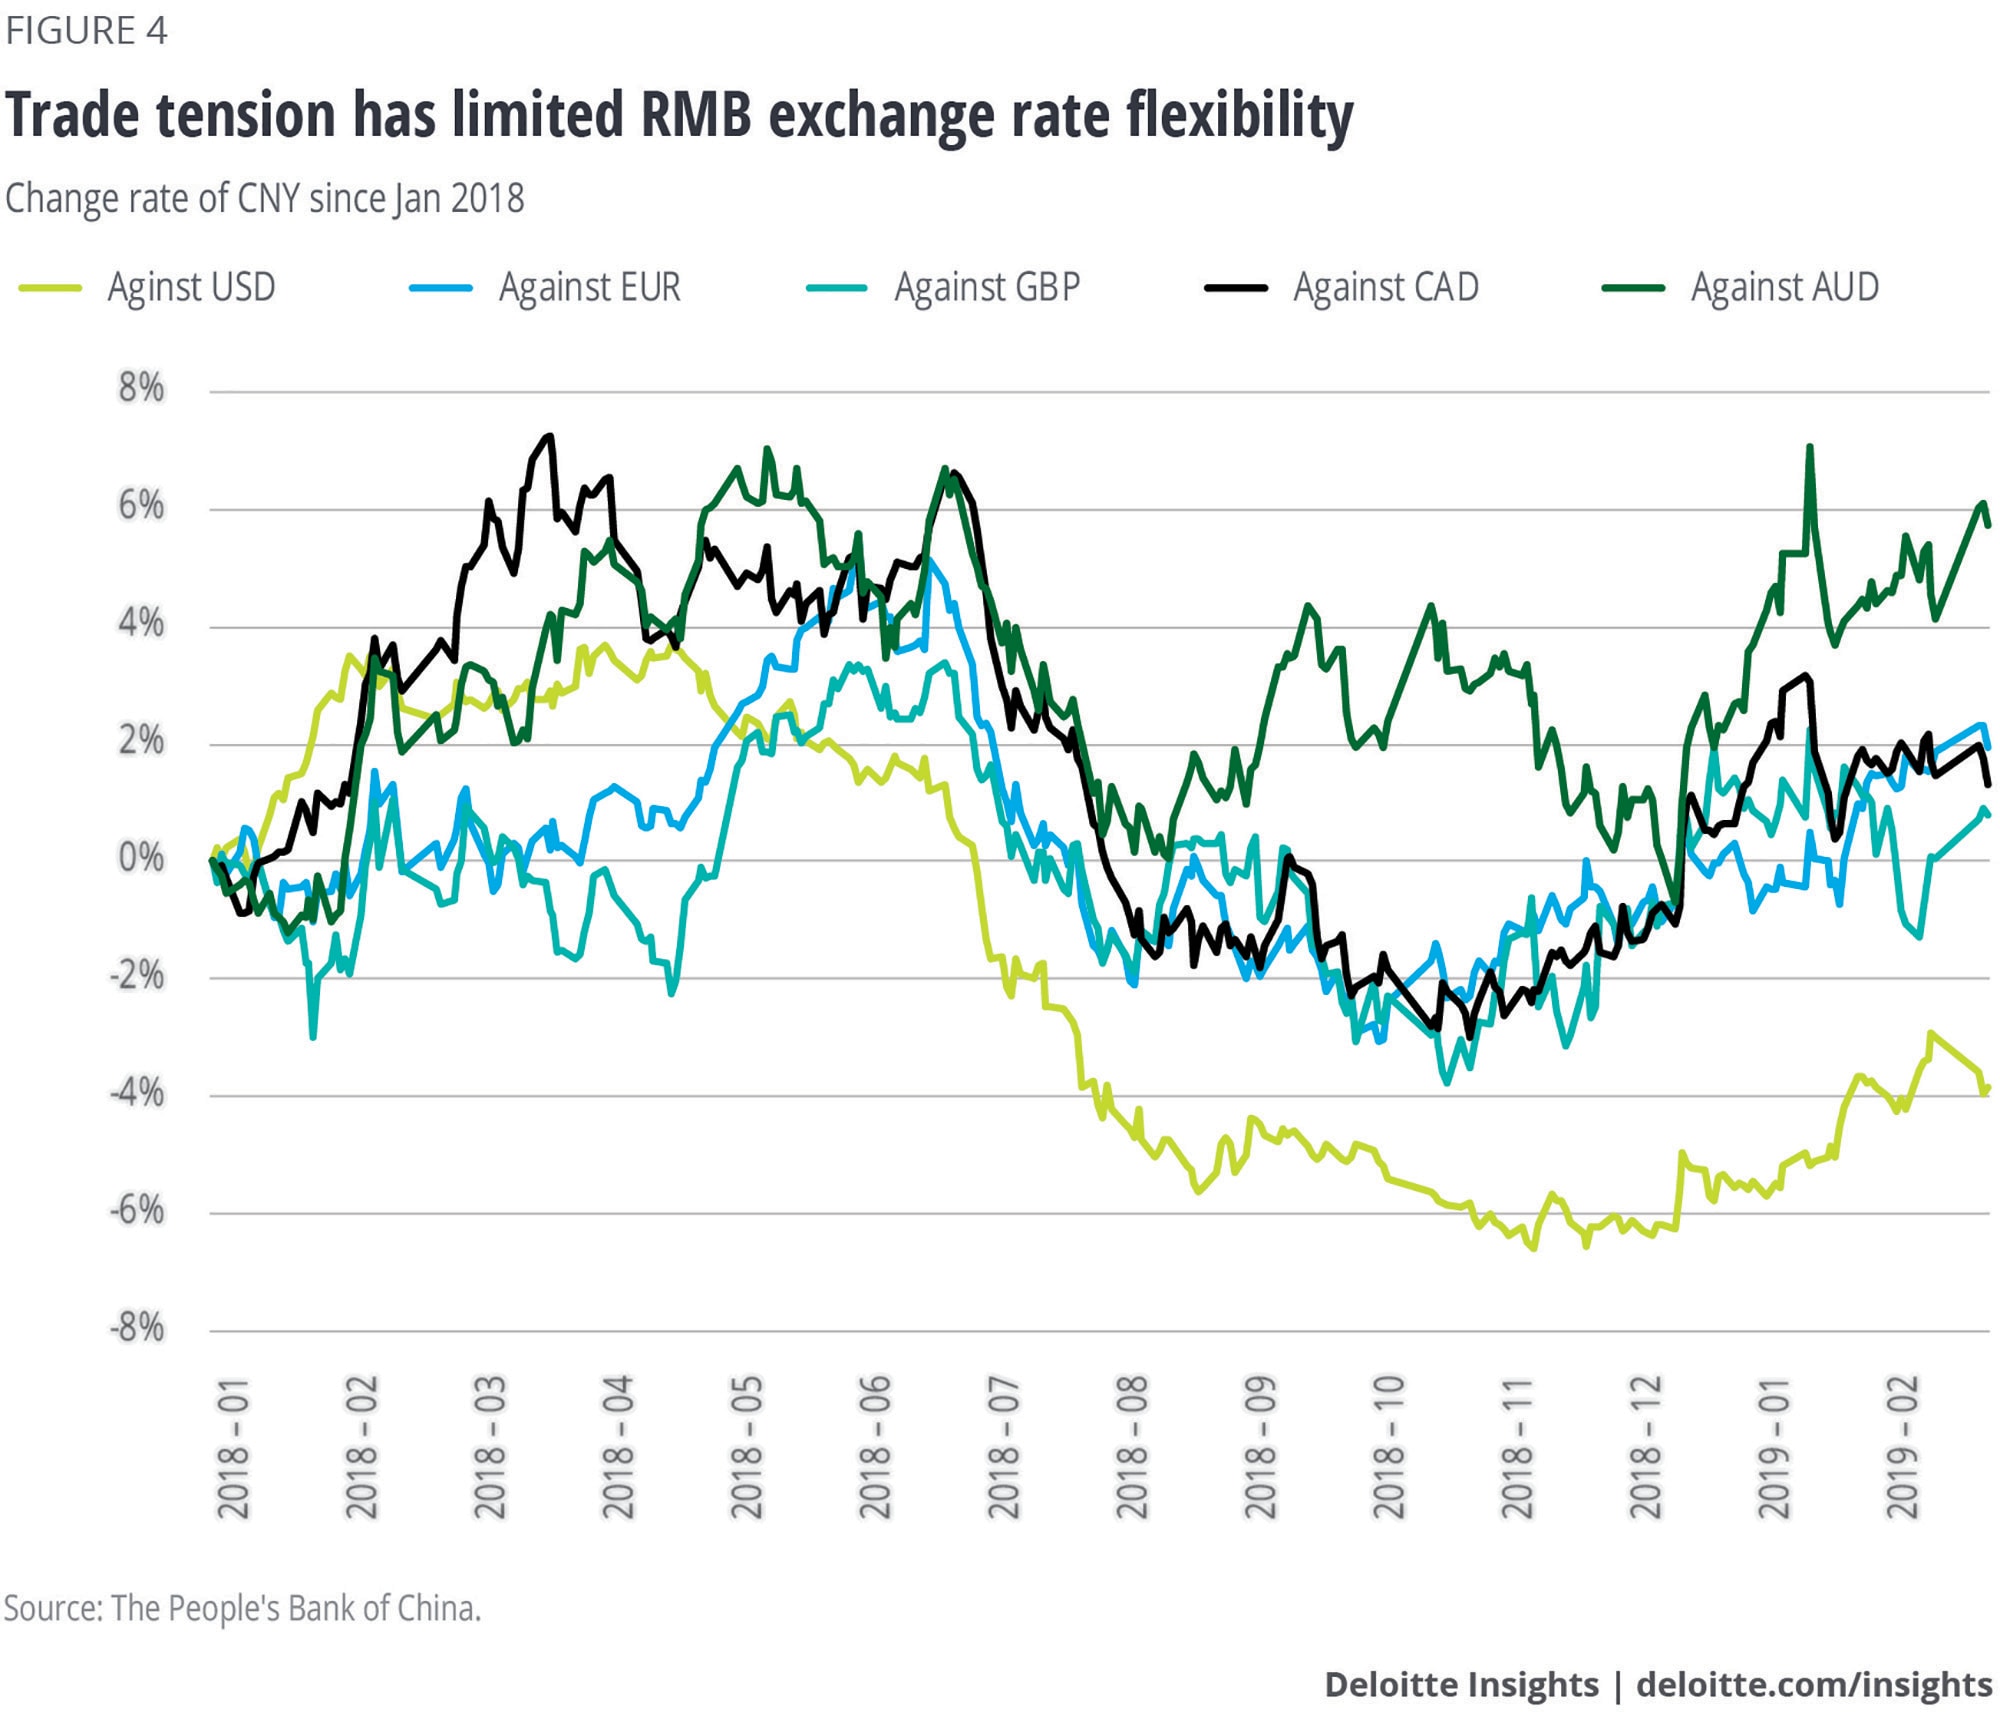 Trade tension has limited RMB exchange rate flexibility